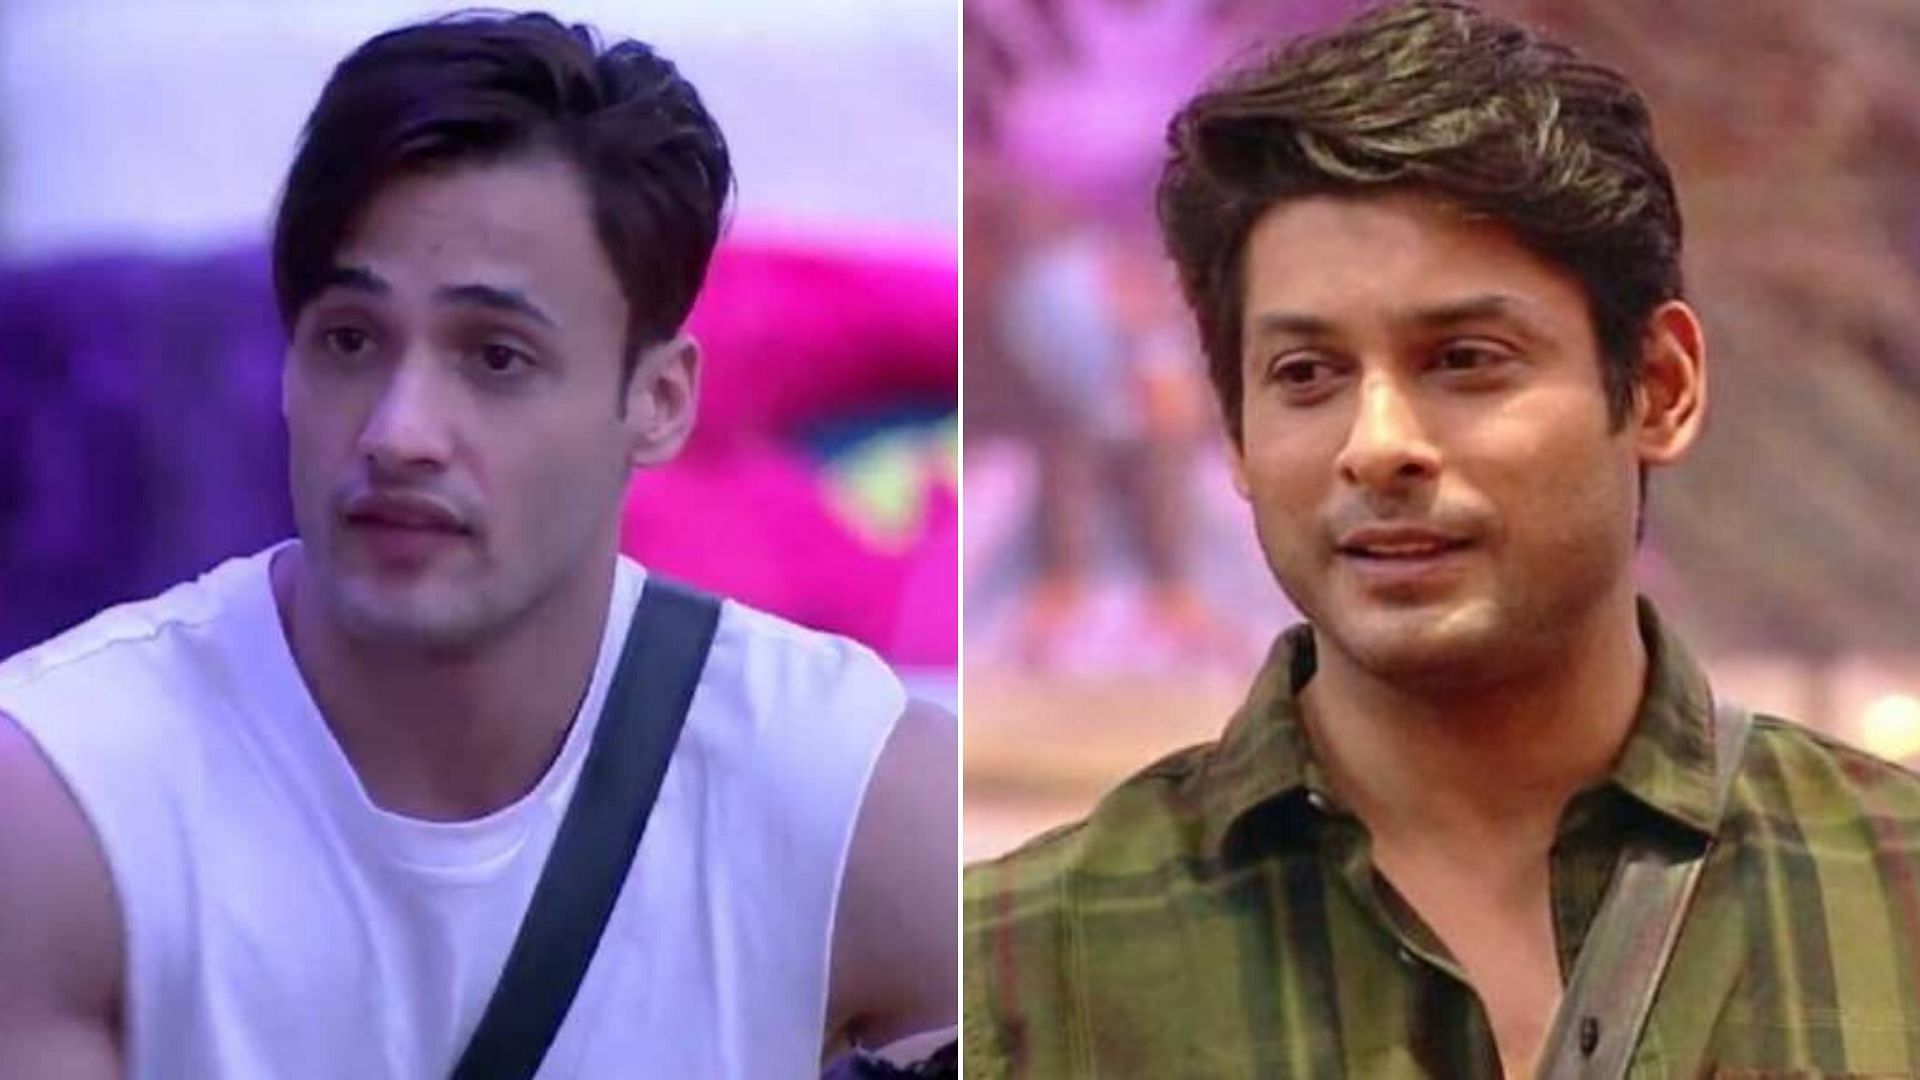 Asim Riaz to face questions on Sidharth Shukla in the latest <i>Bigg Boss 13 </i>episode.